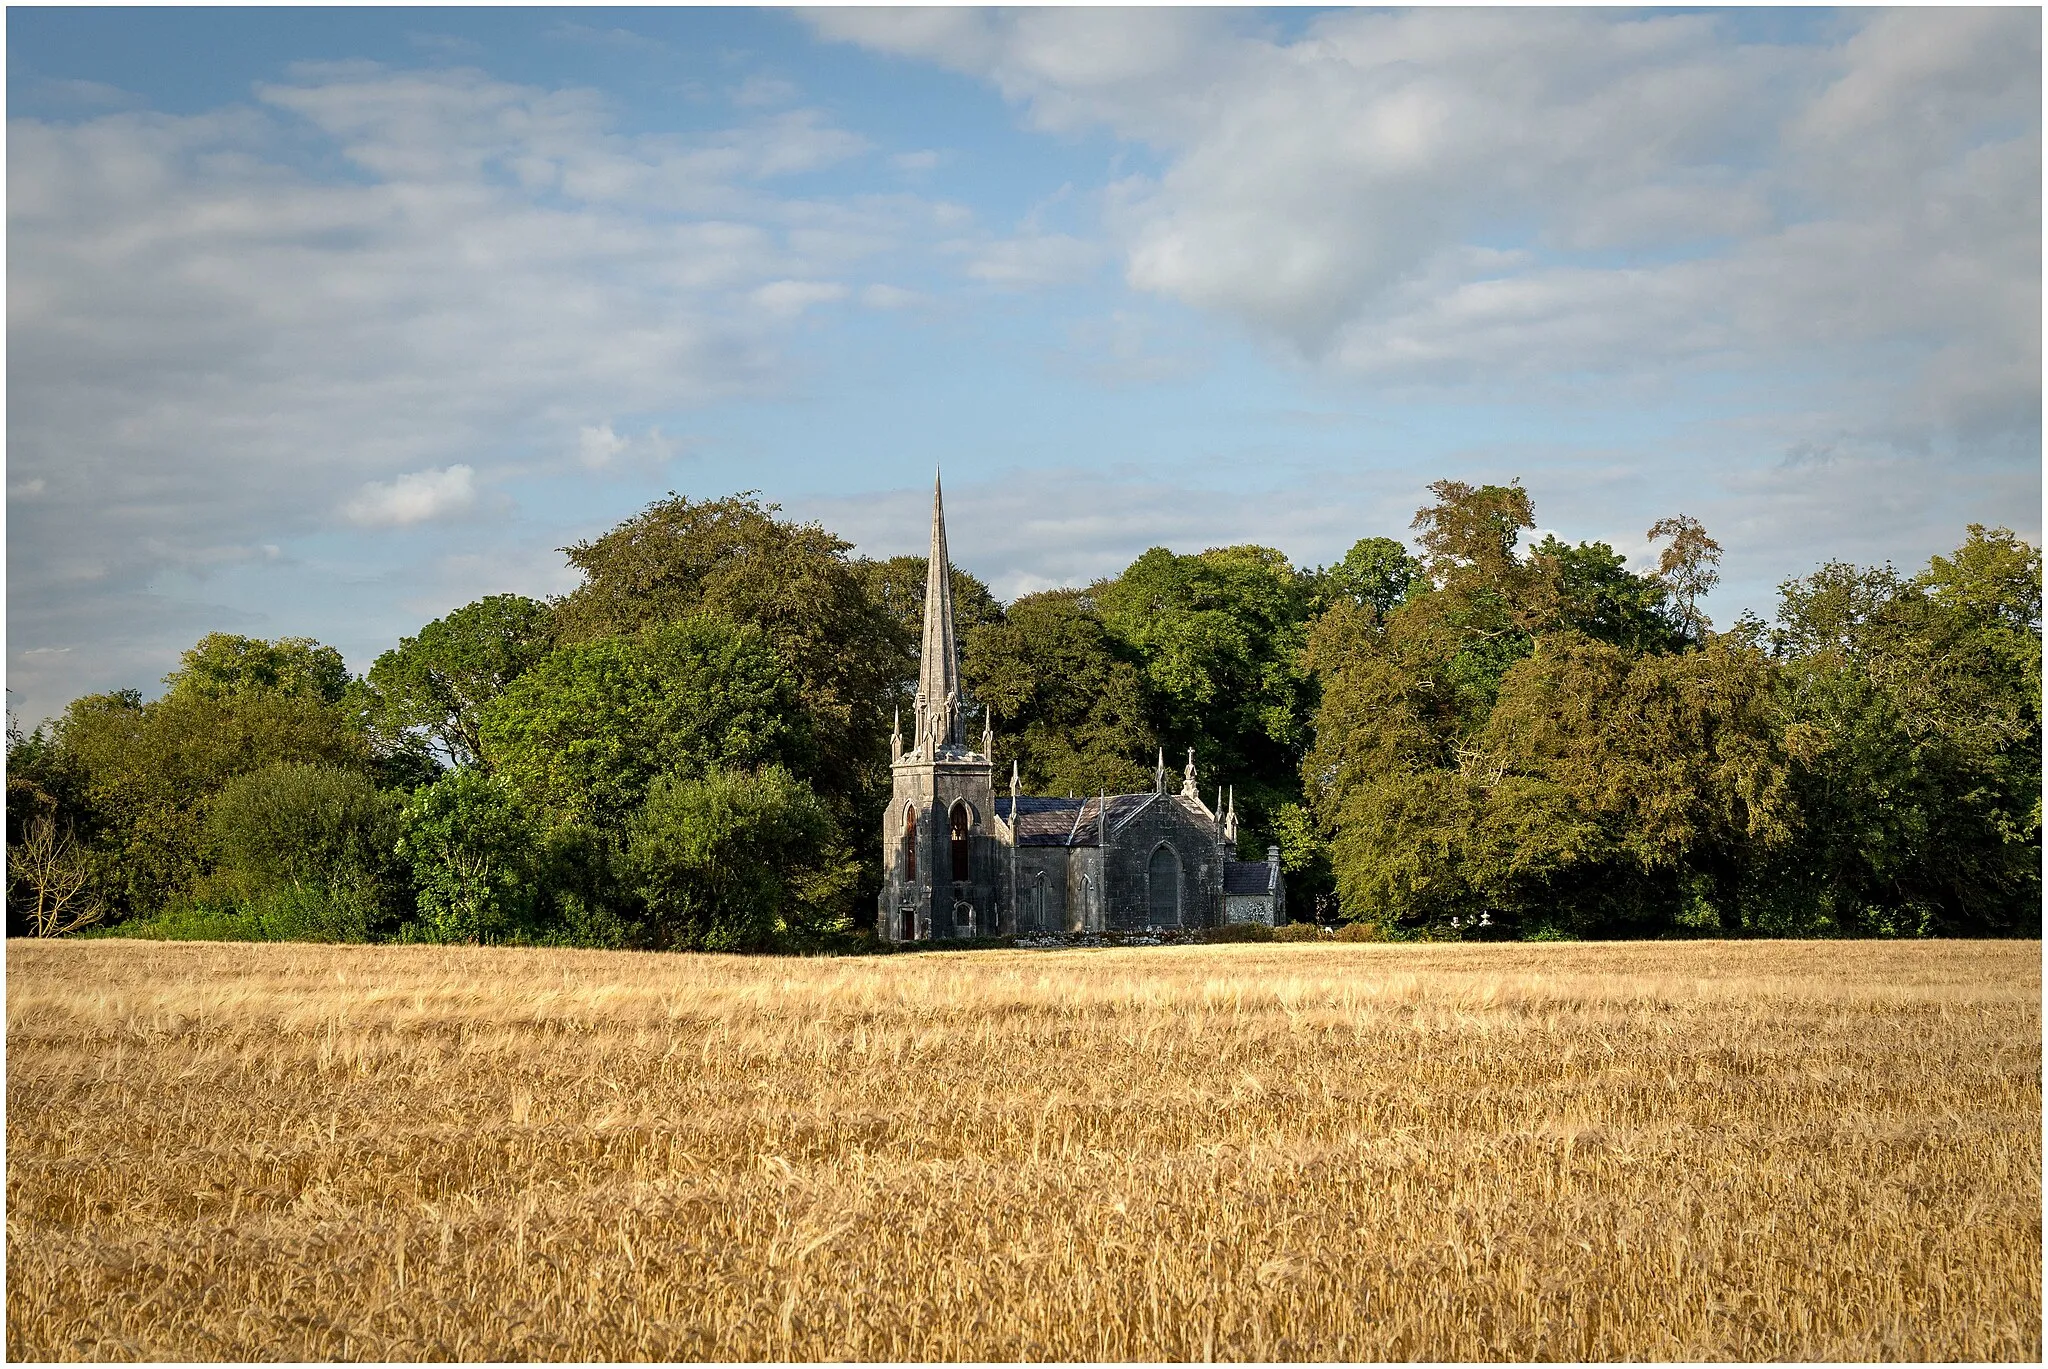 Photo showing: Hard to find, almost surrounded by trees, and maybe not in use any more, this is St John's in Buttevant, Co Cork.